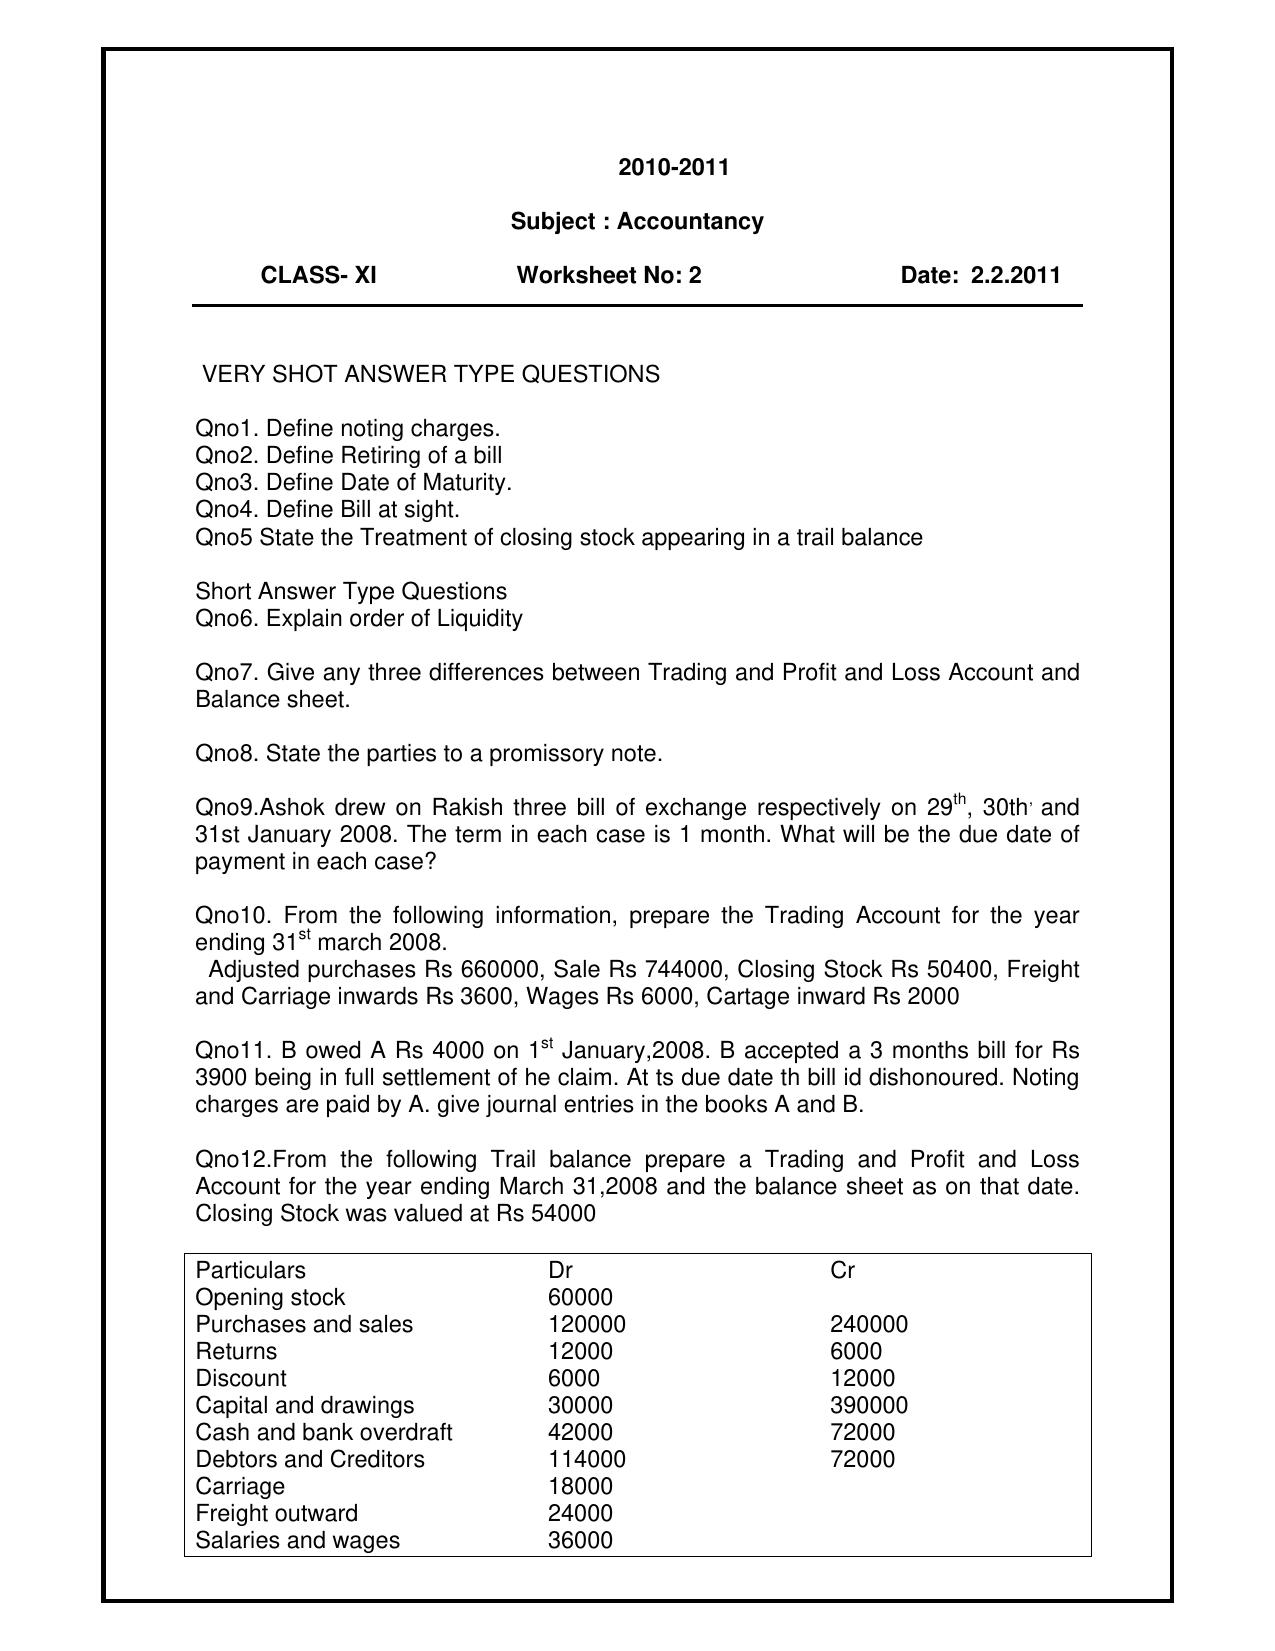 CBSE Worksheets for Class 11 Accountancy Assignment 1 - Page 1